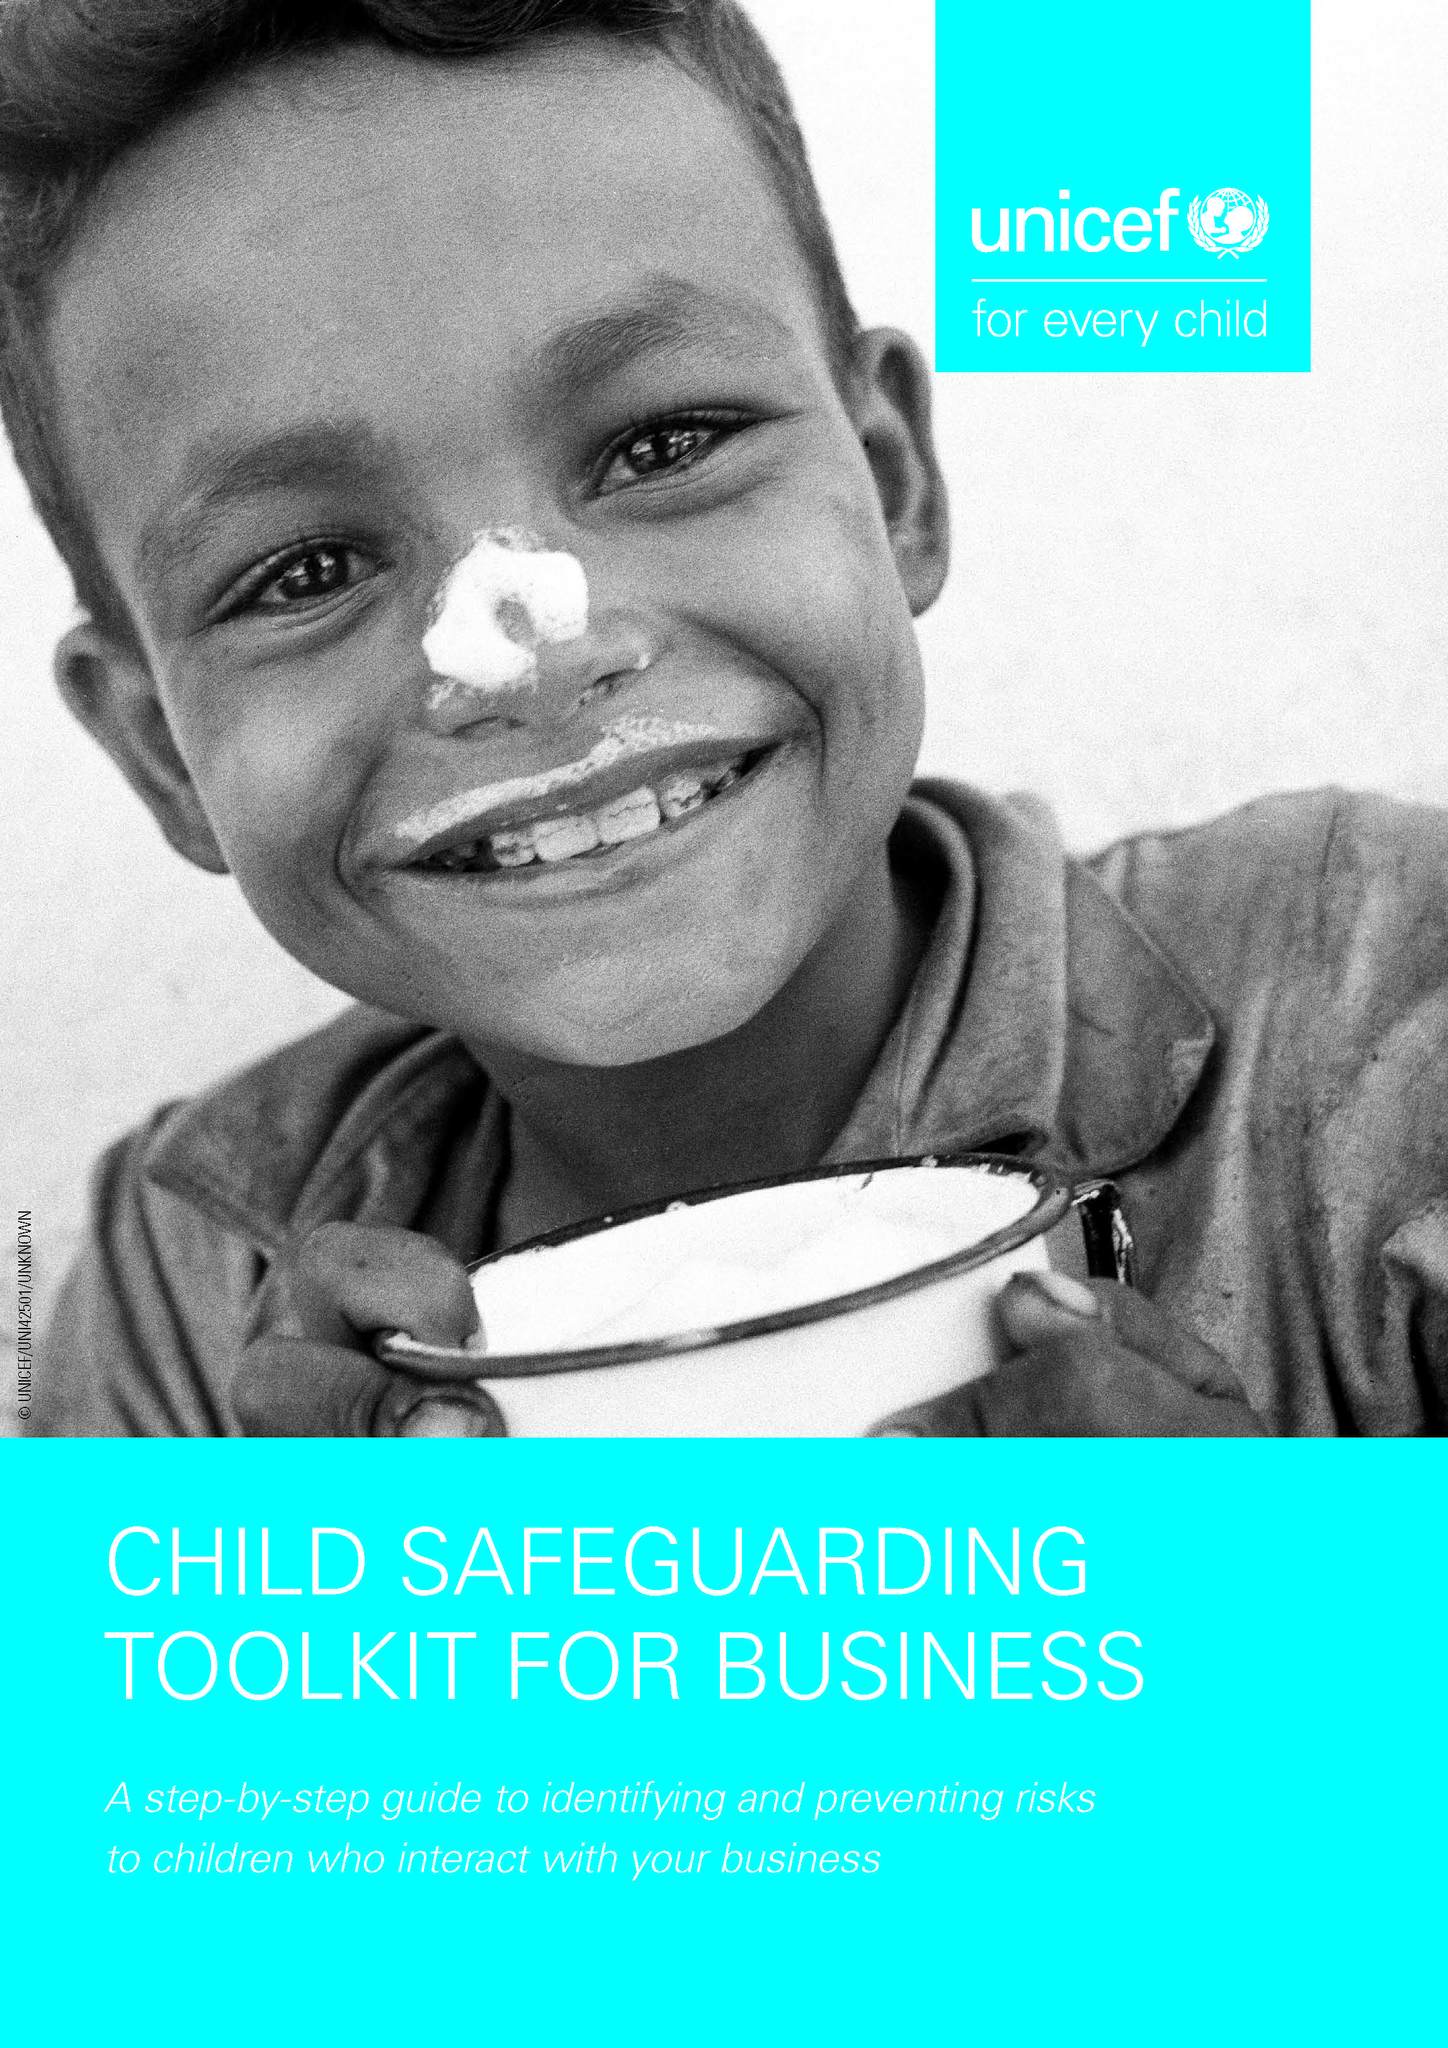 Child safeguarding toolkit for business